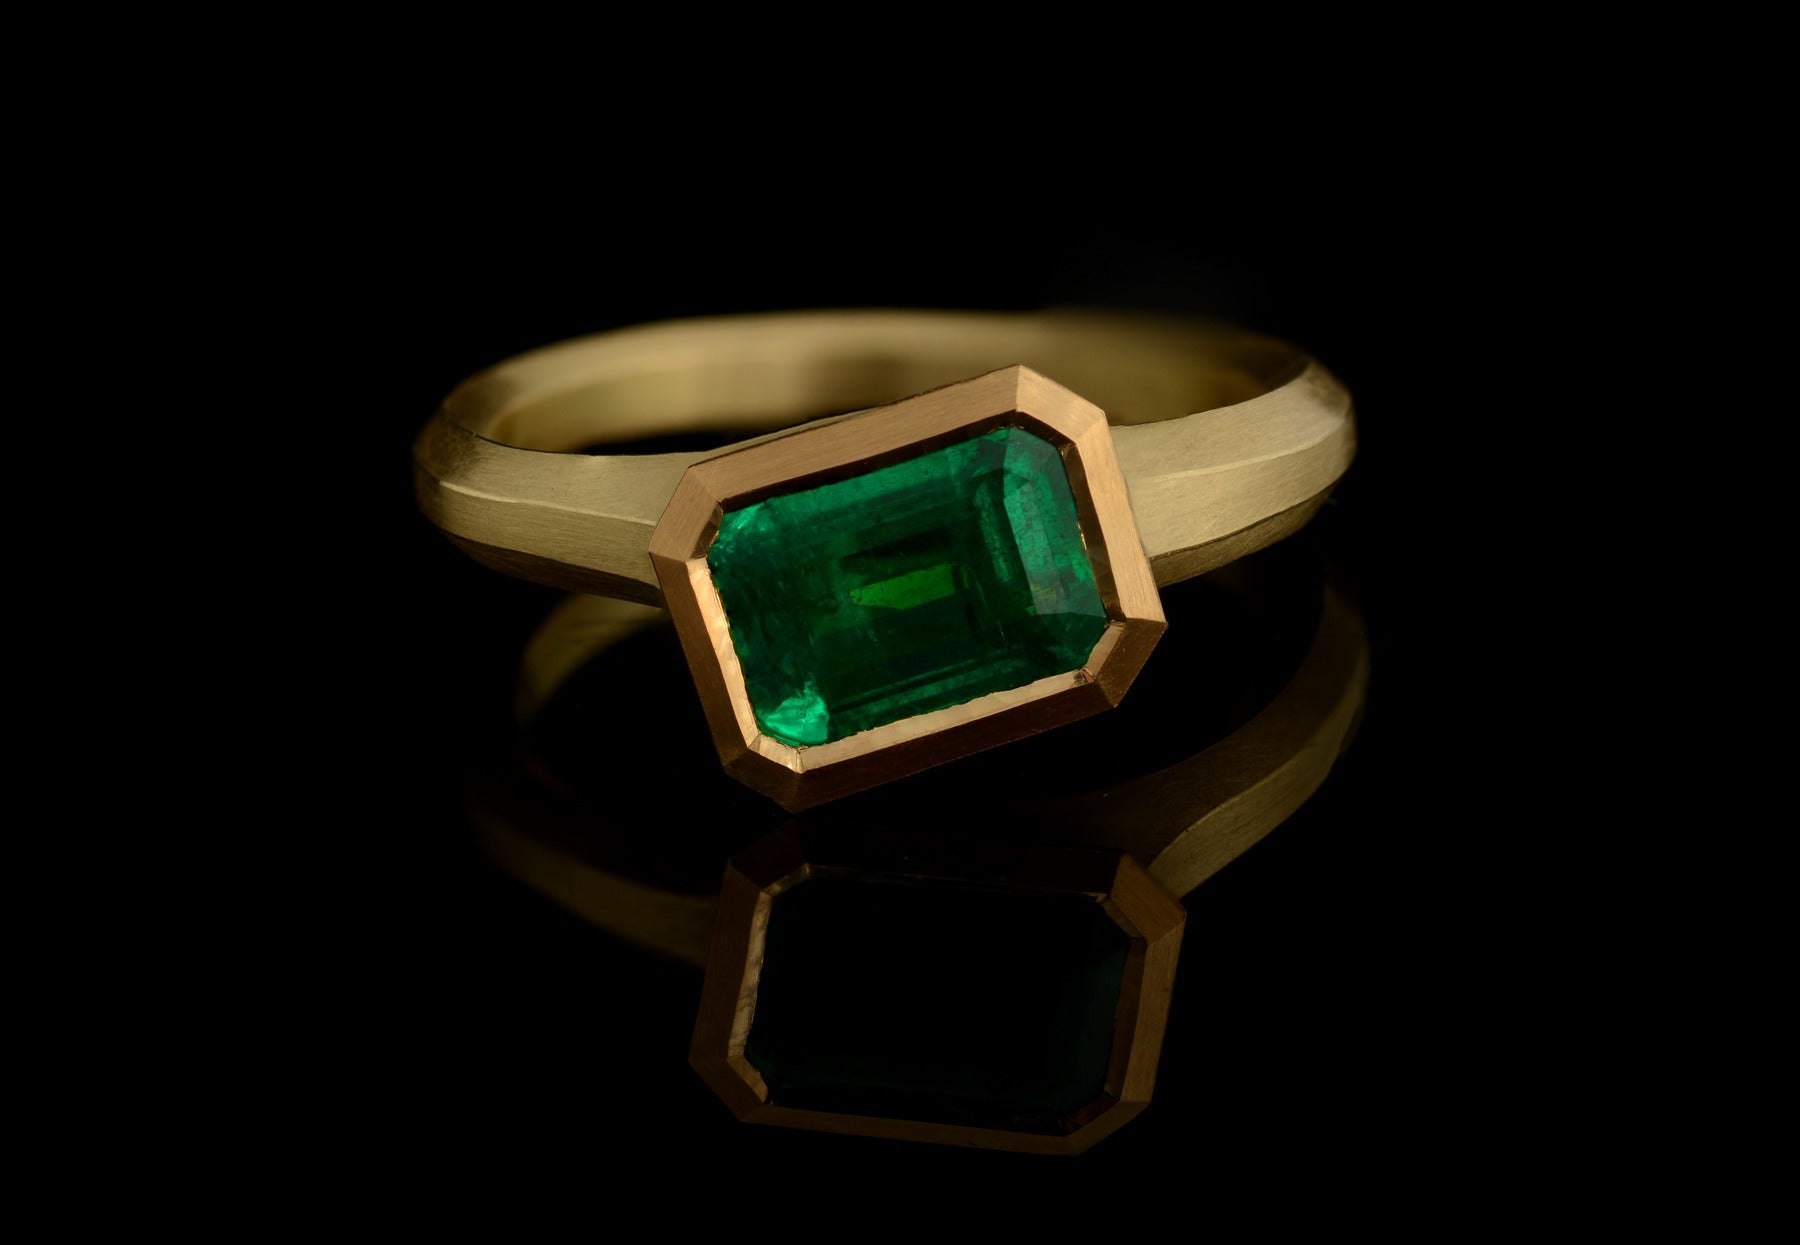 Arris emerald cut emerald and yellow gold ring